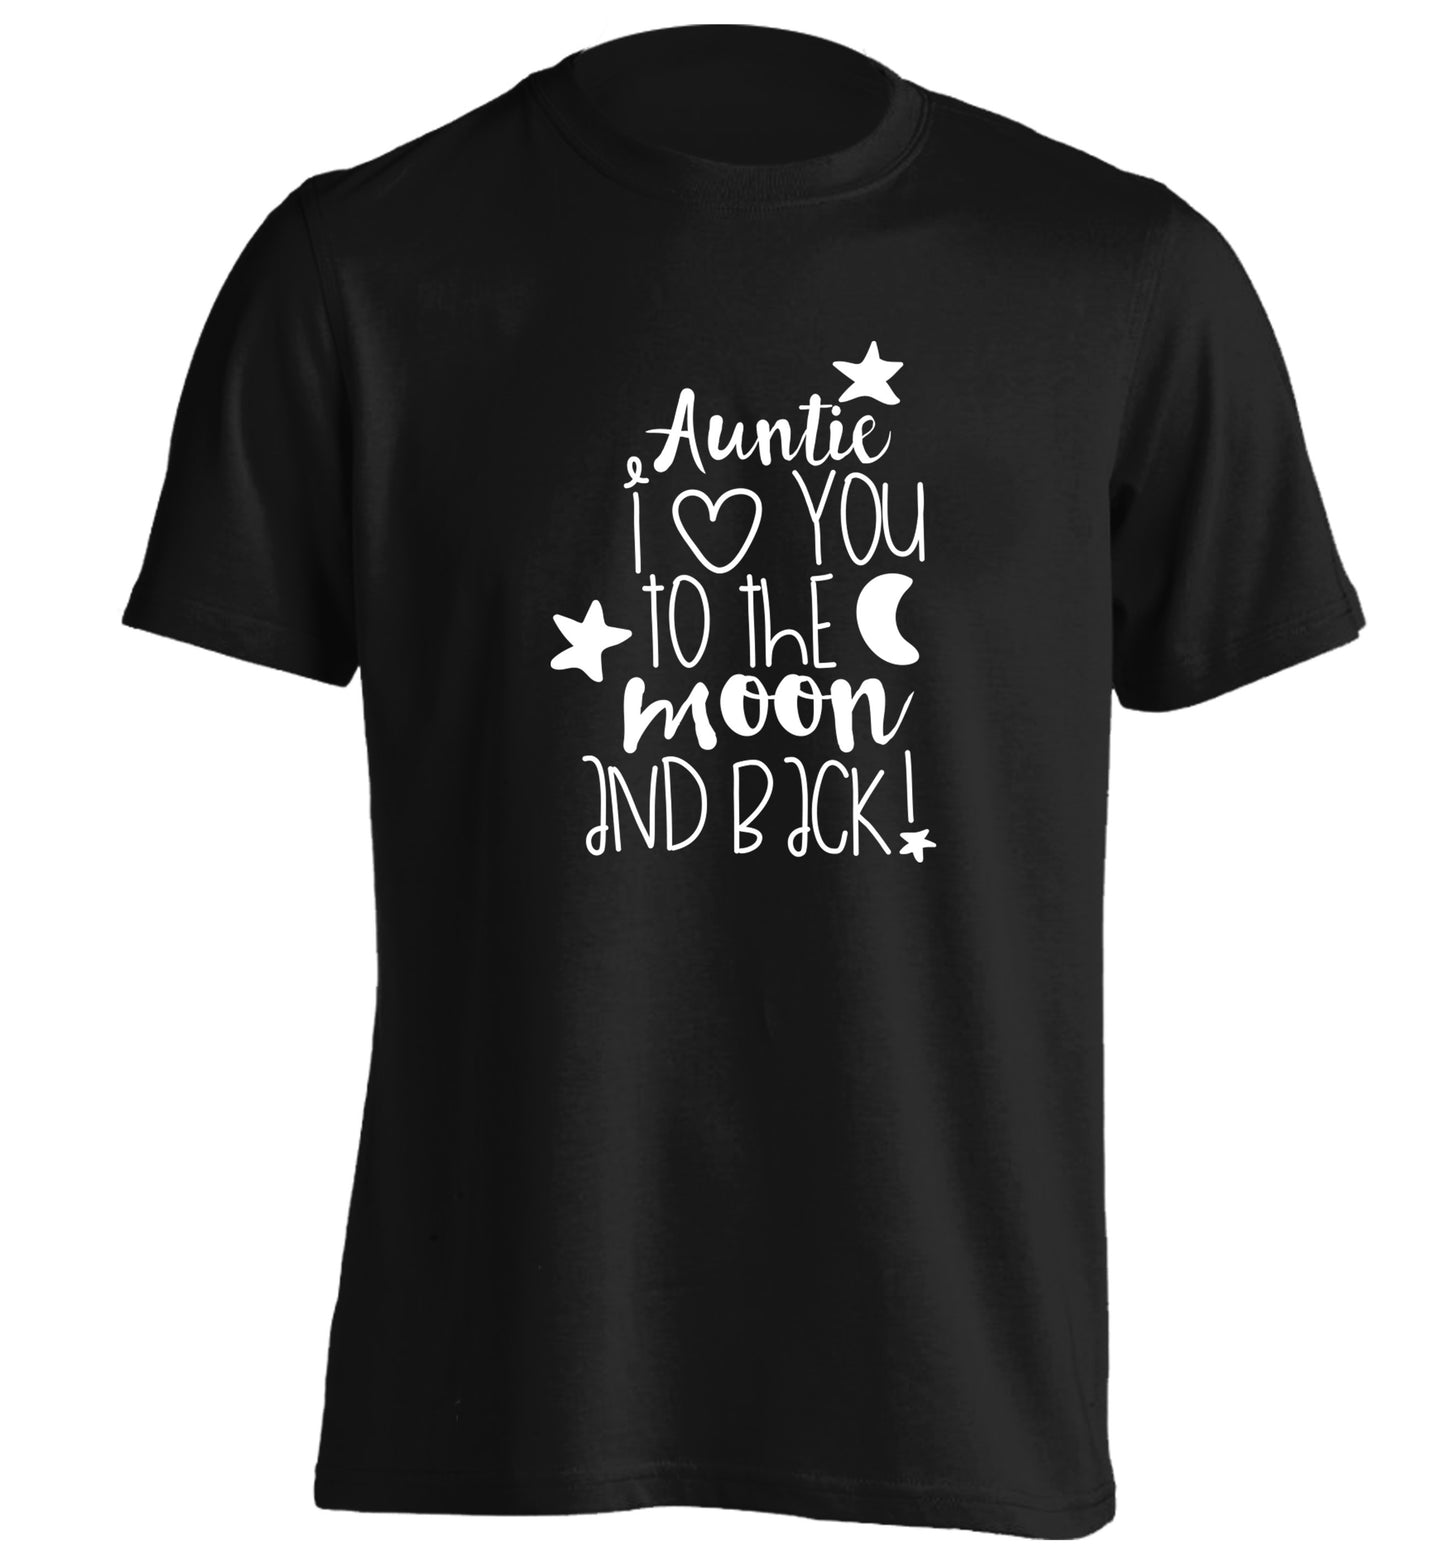 Auntie I love you to the moon and back adults unisex black Tshirt 2XL